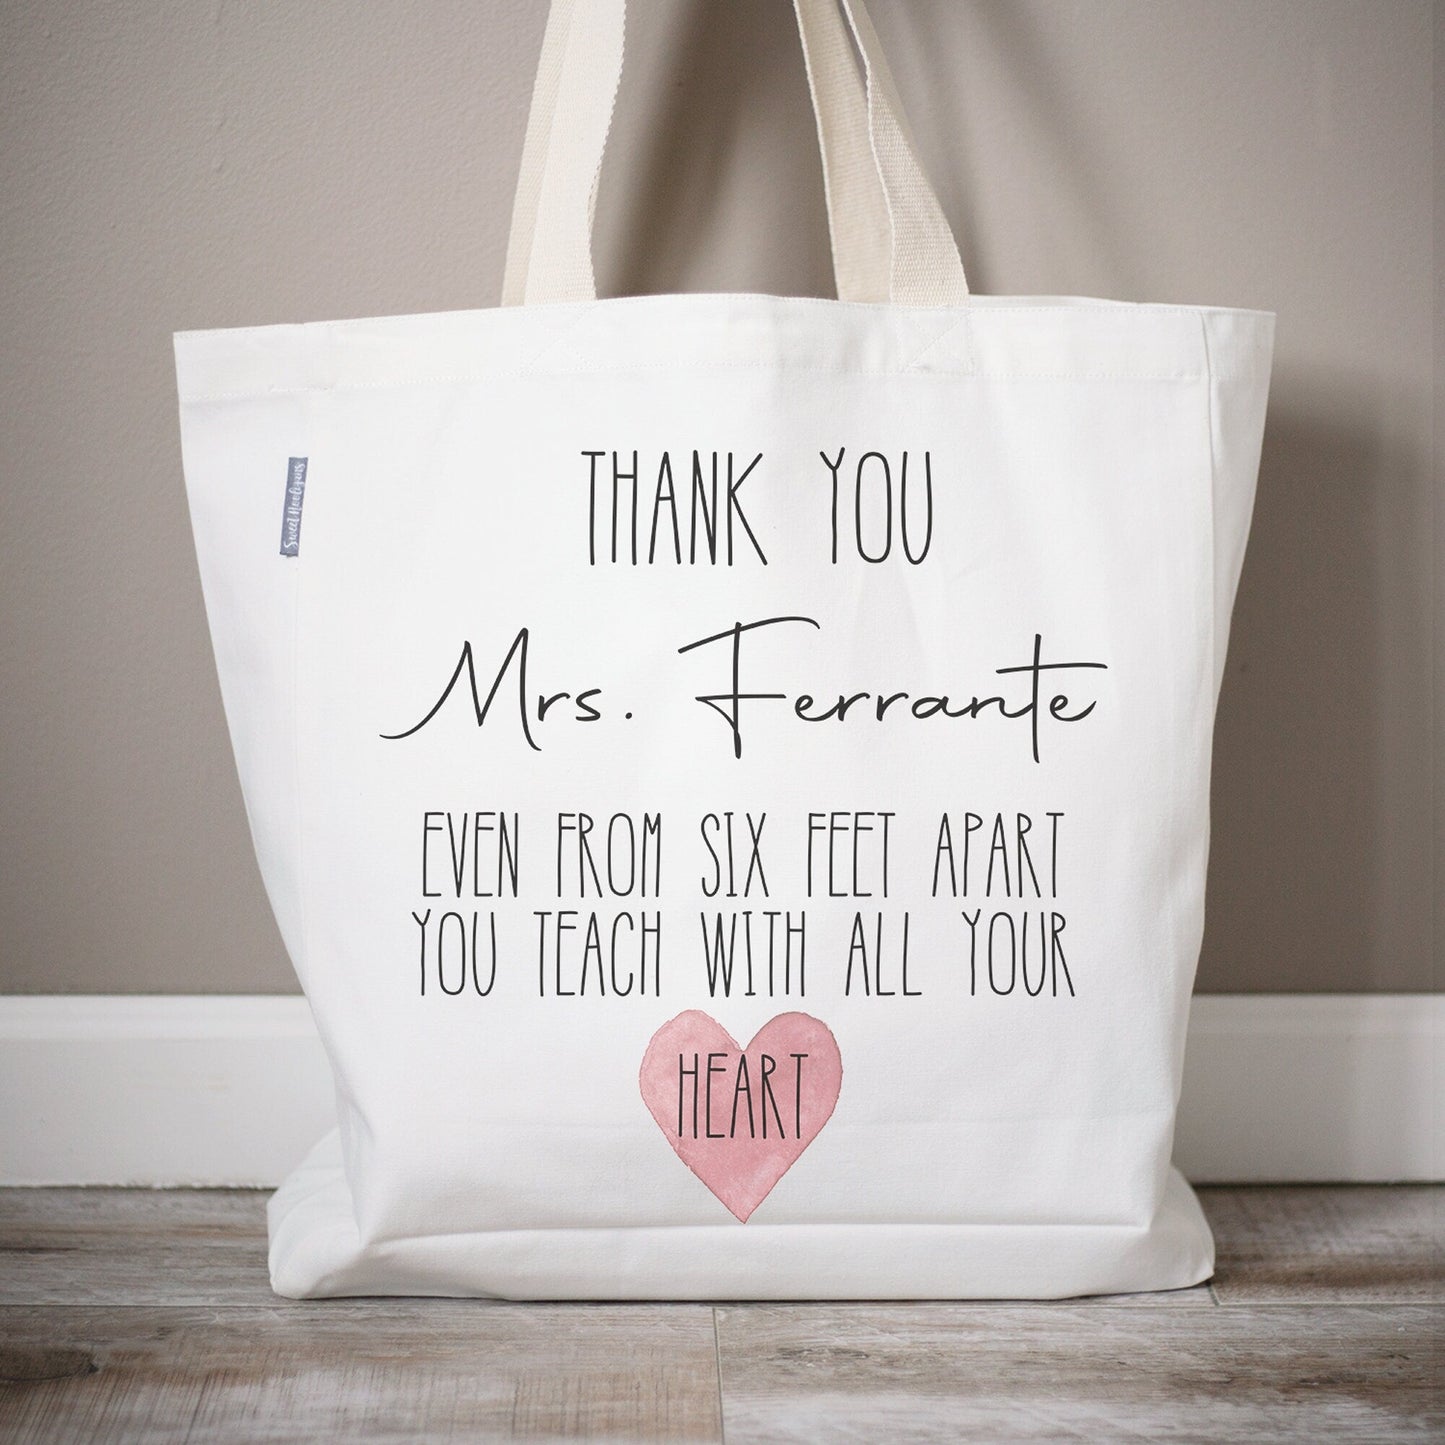 Even From Six Fee Apart You Still Teach With All Your Heart Tote Bag Teacher Gift | Teacher Appreciation Gift | Personalized Teacher Bag